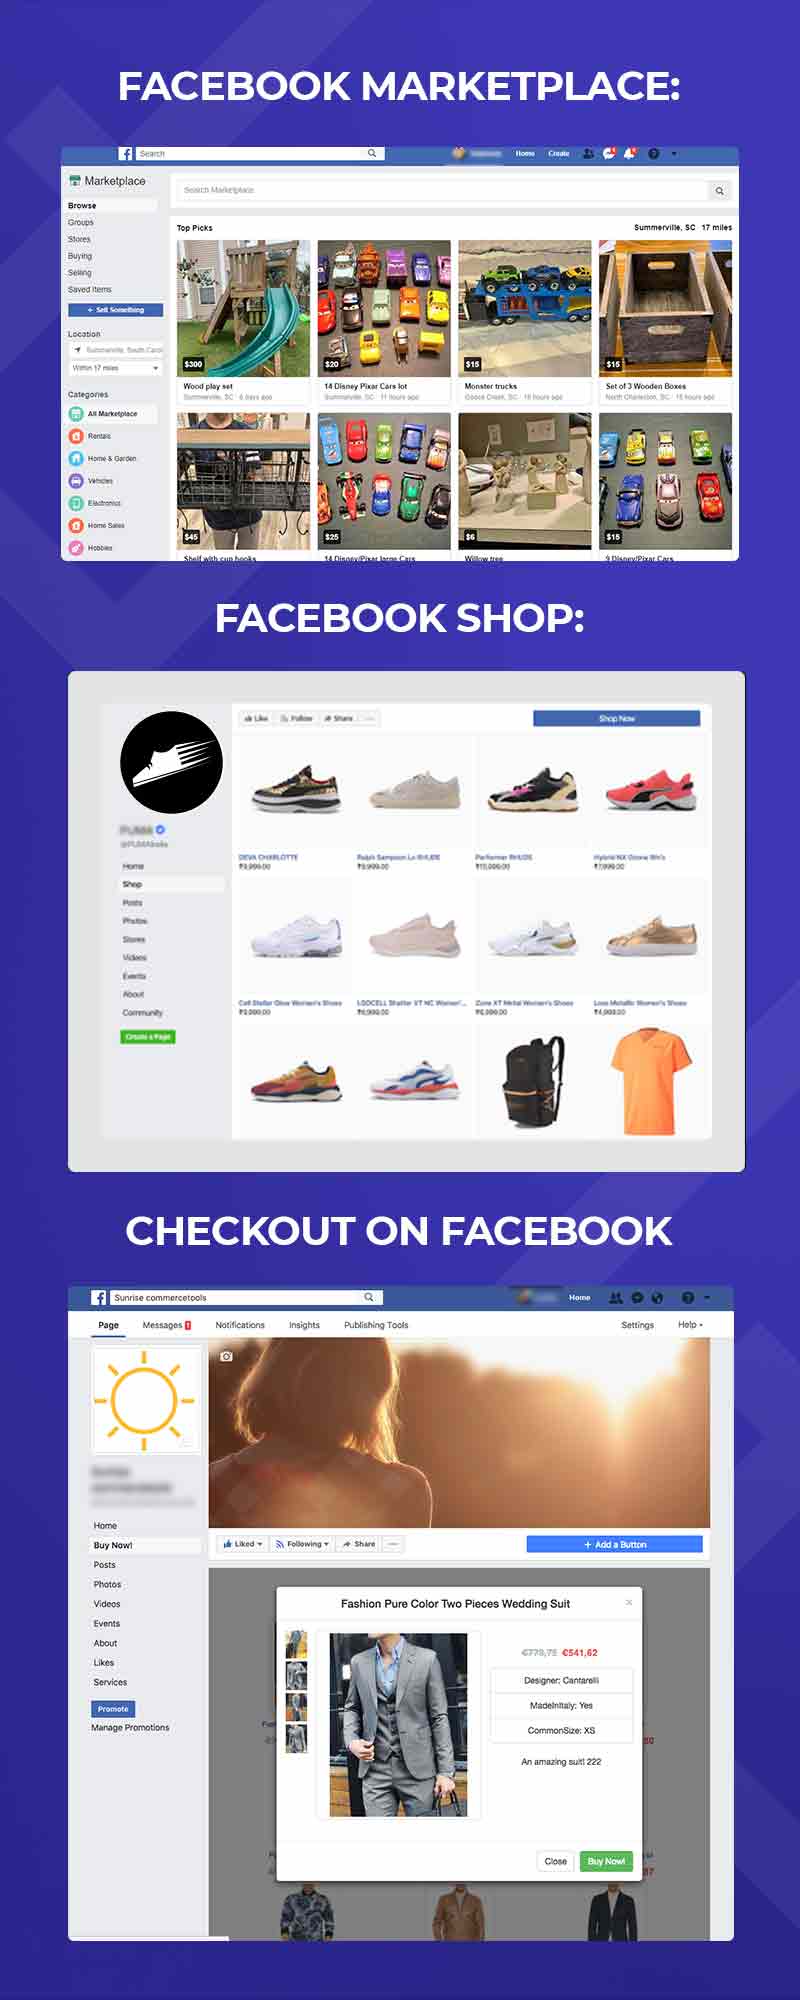 Difference Facebook Surfaces to sell onrfaces to sell on